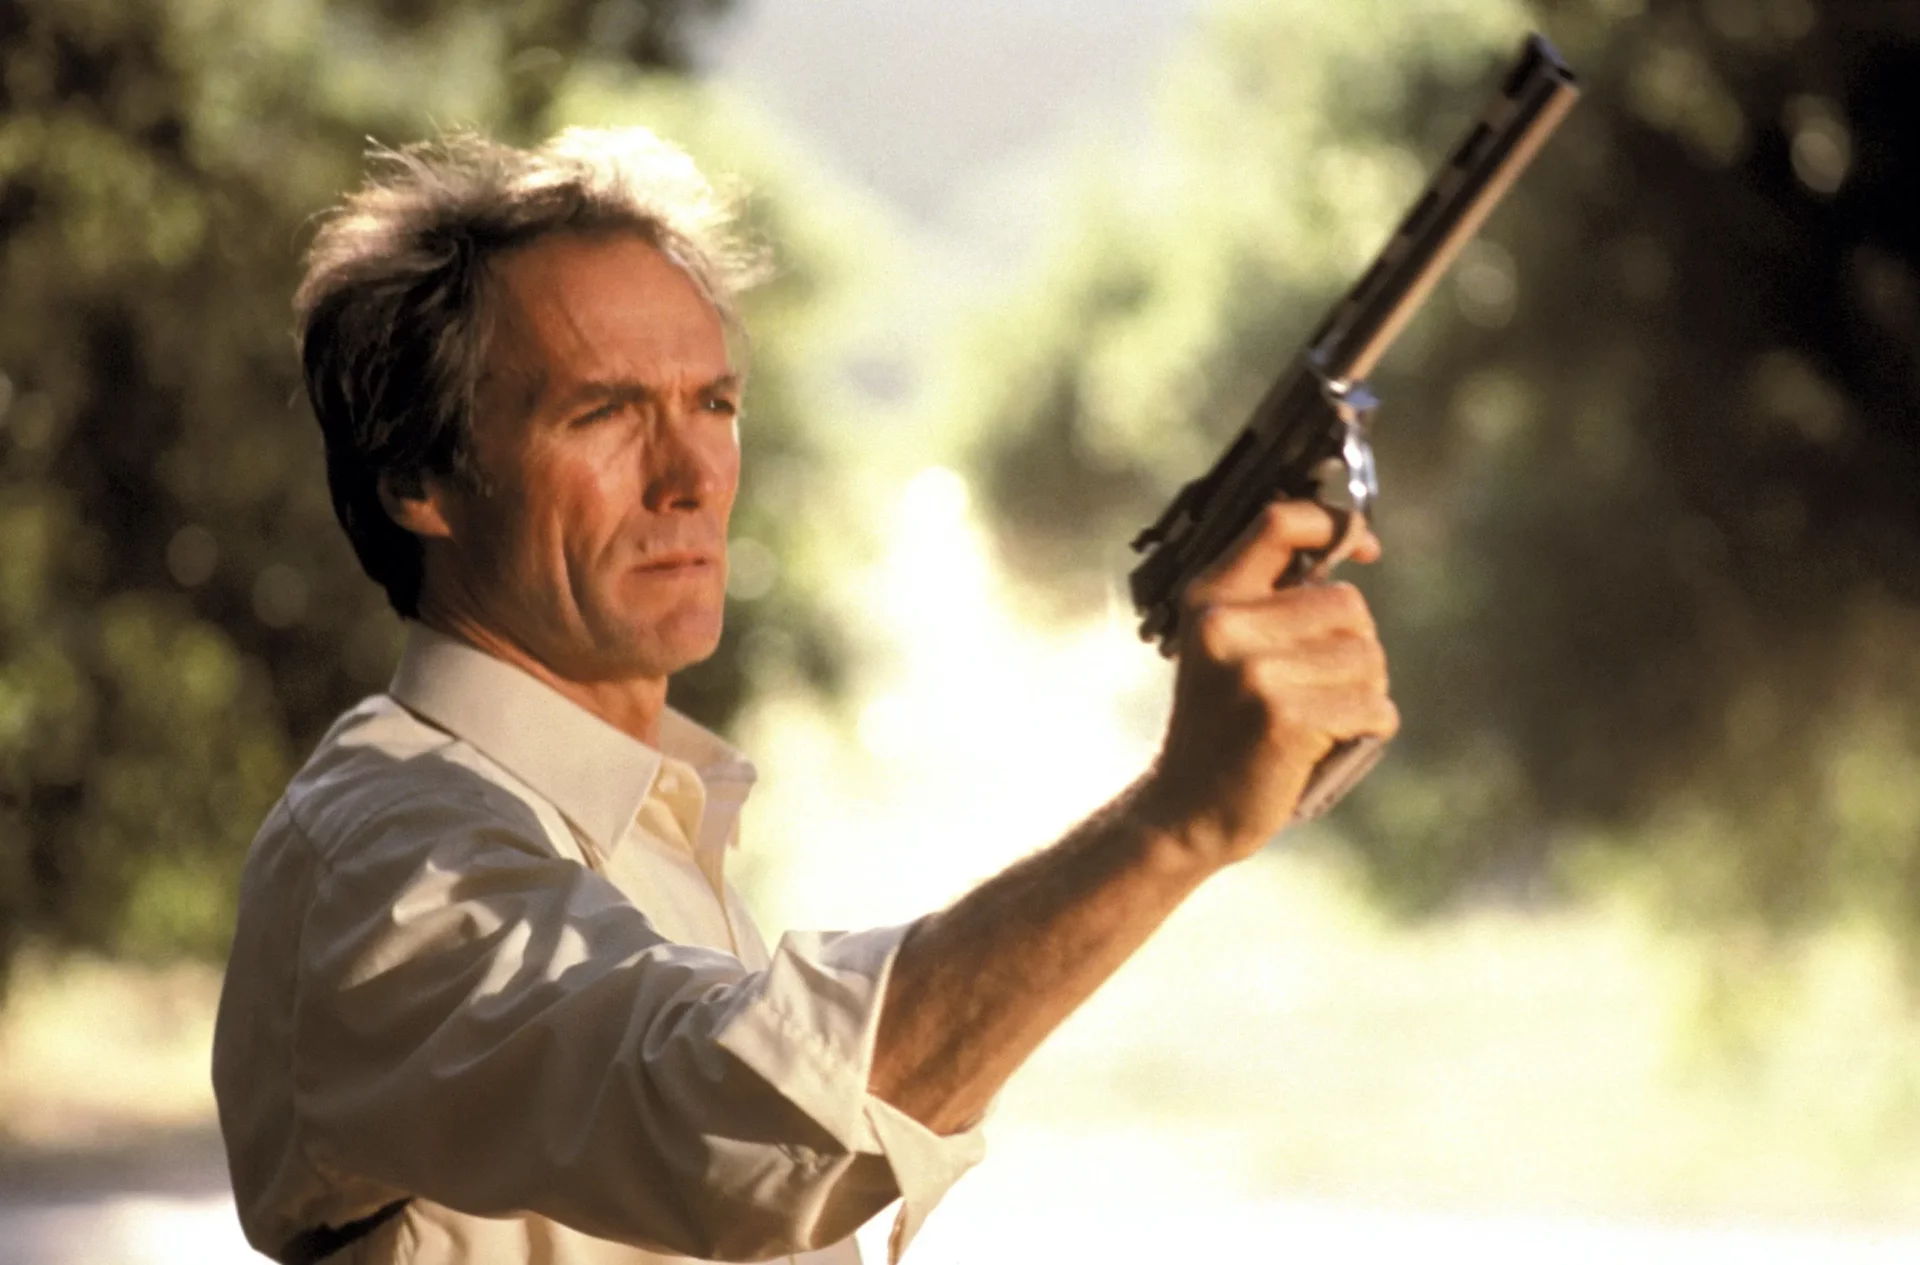 Best Clint Eastwood movies: Sudden impact (1983)